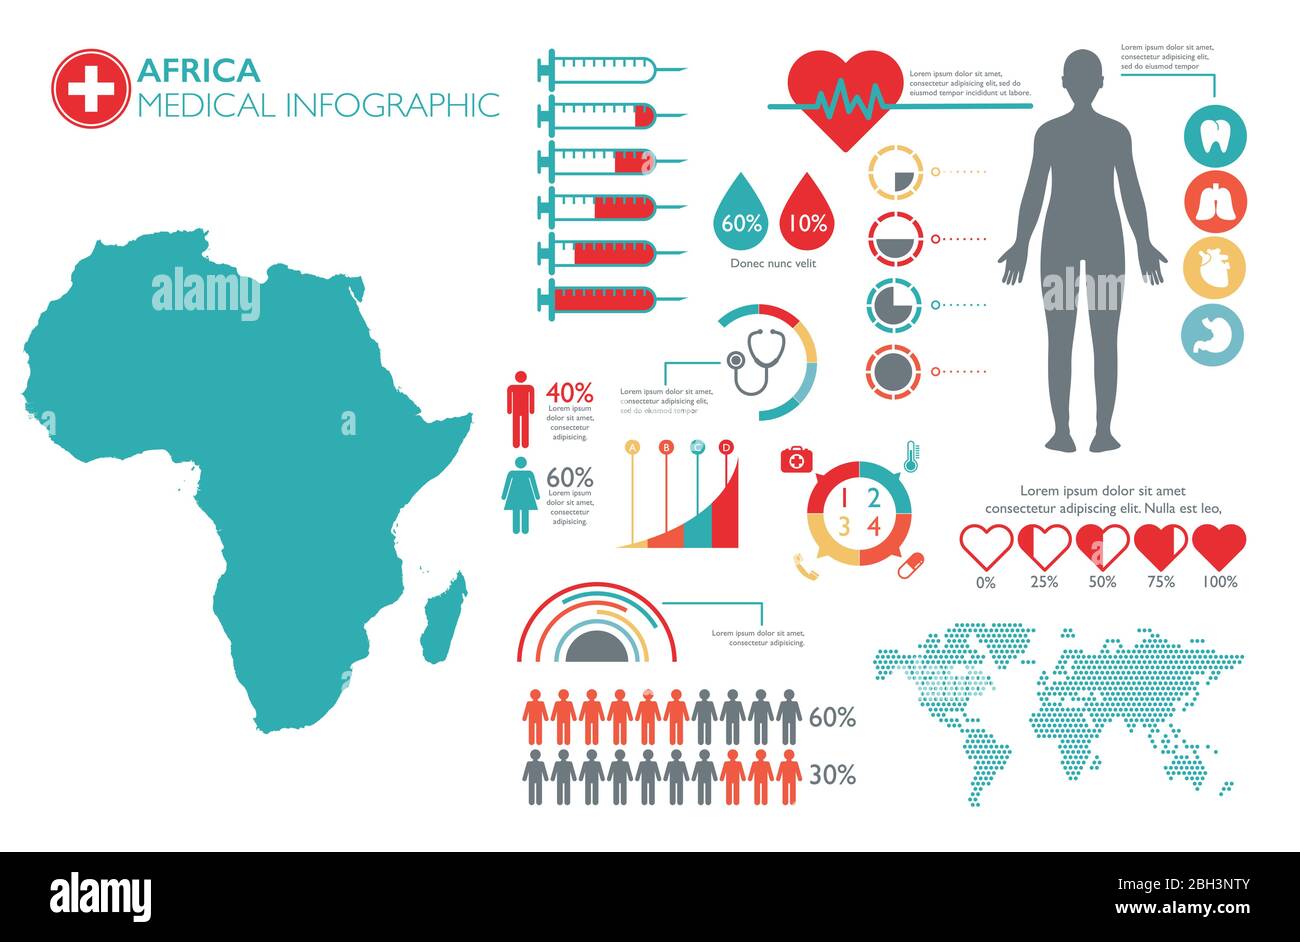 Africa medical healthcare infographic template with map and multiple charts Stock Vector